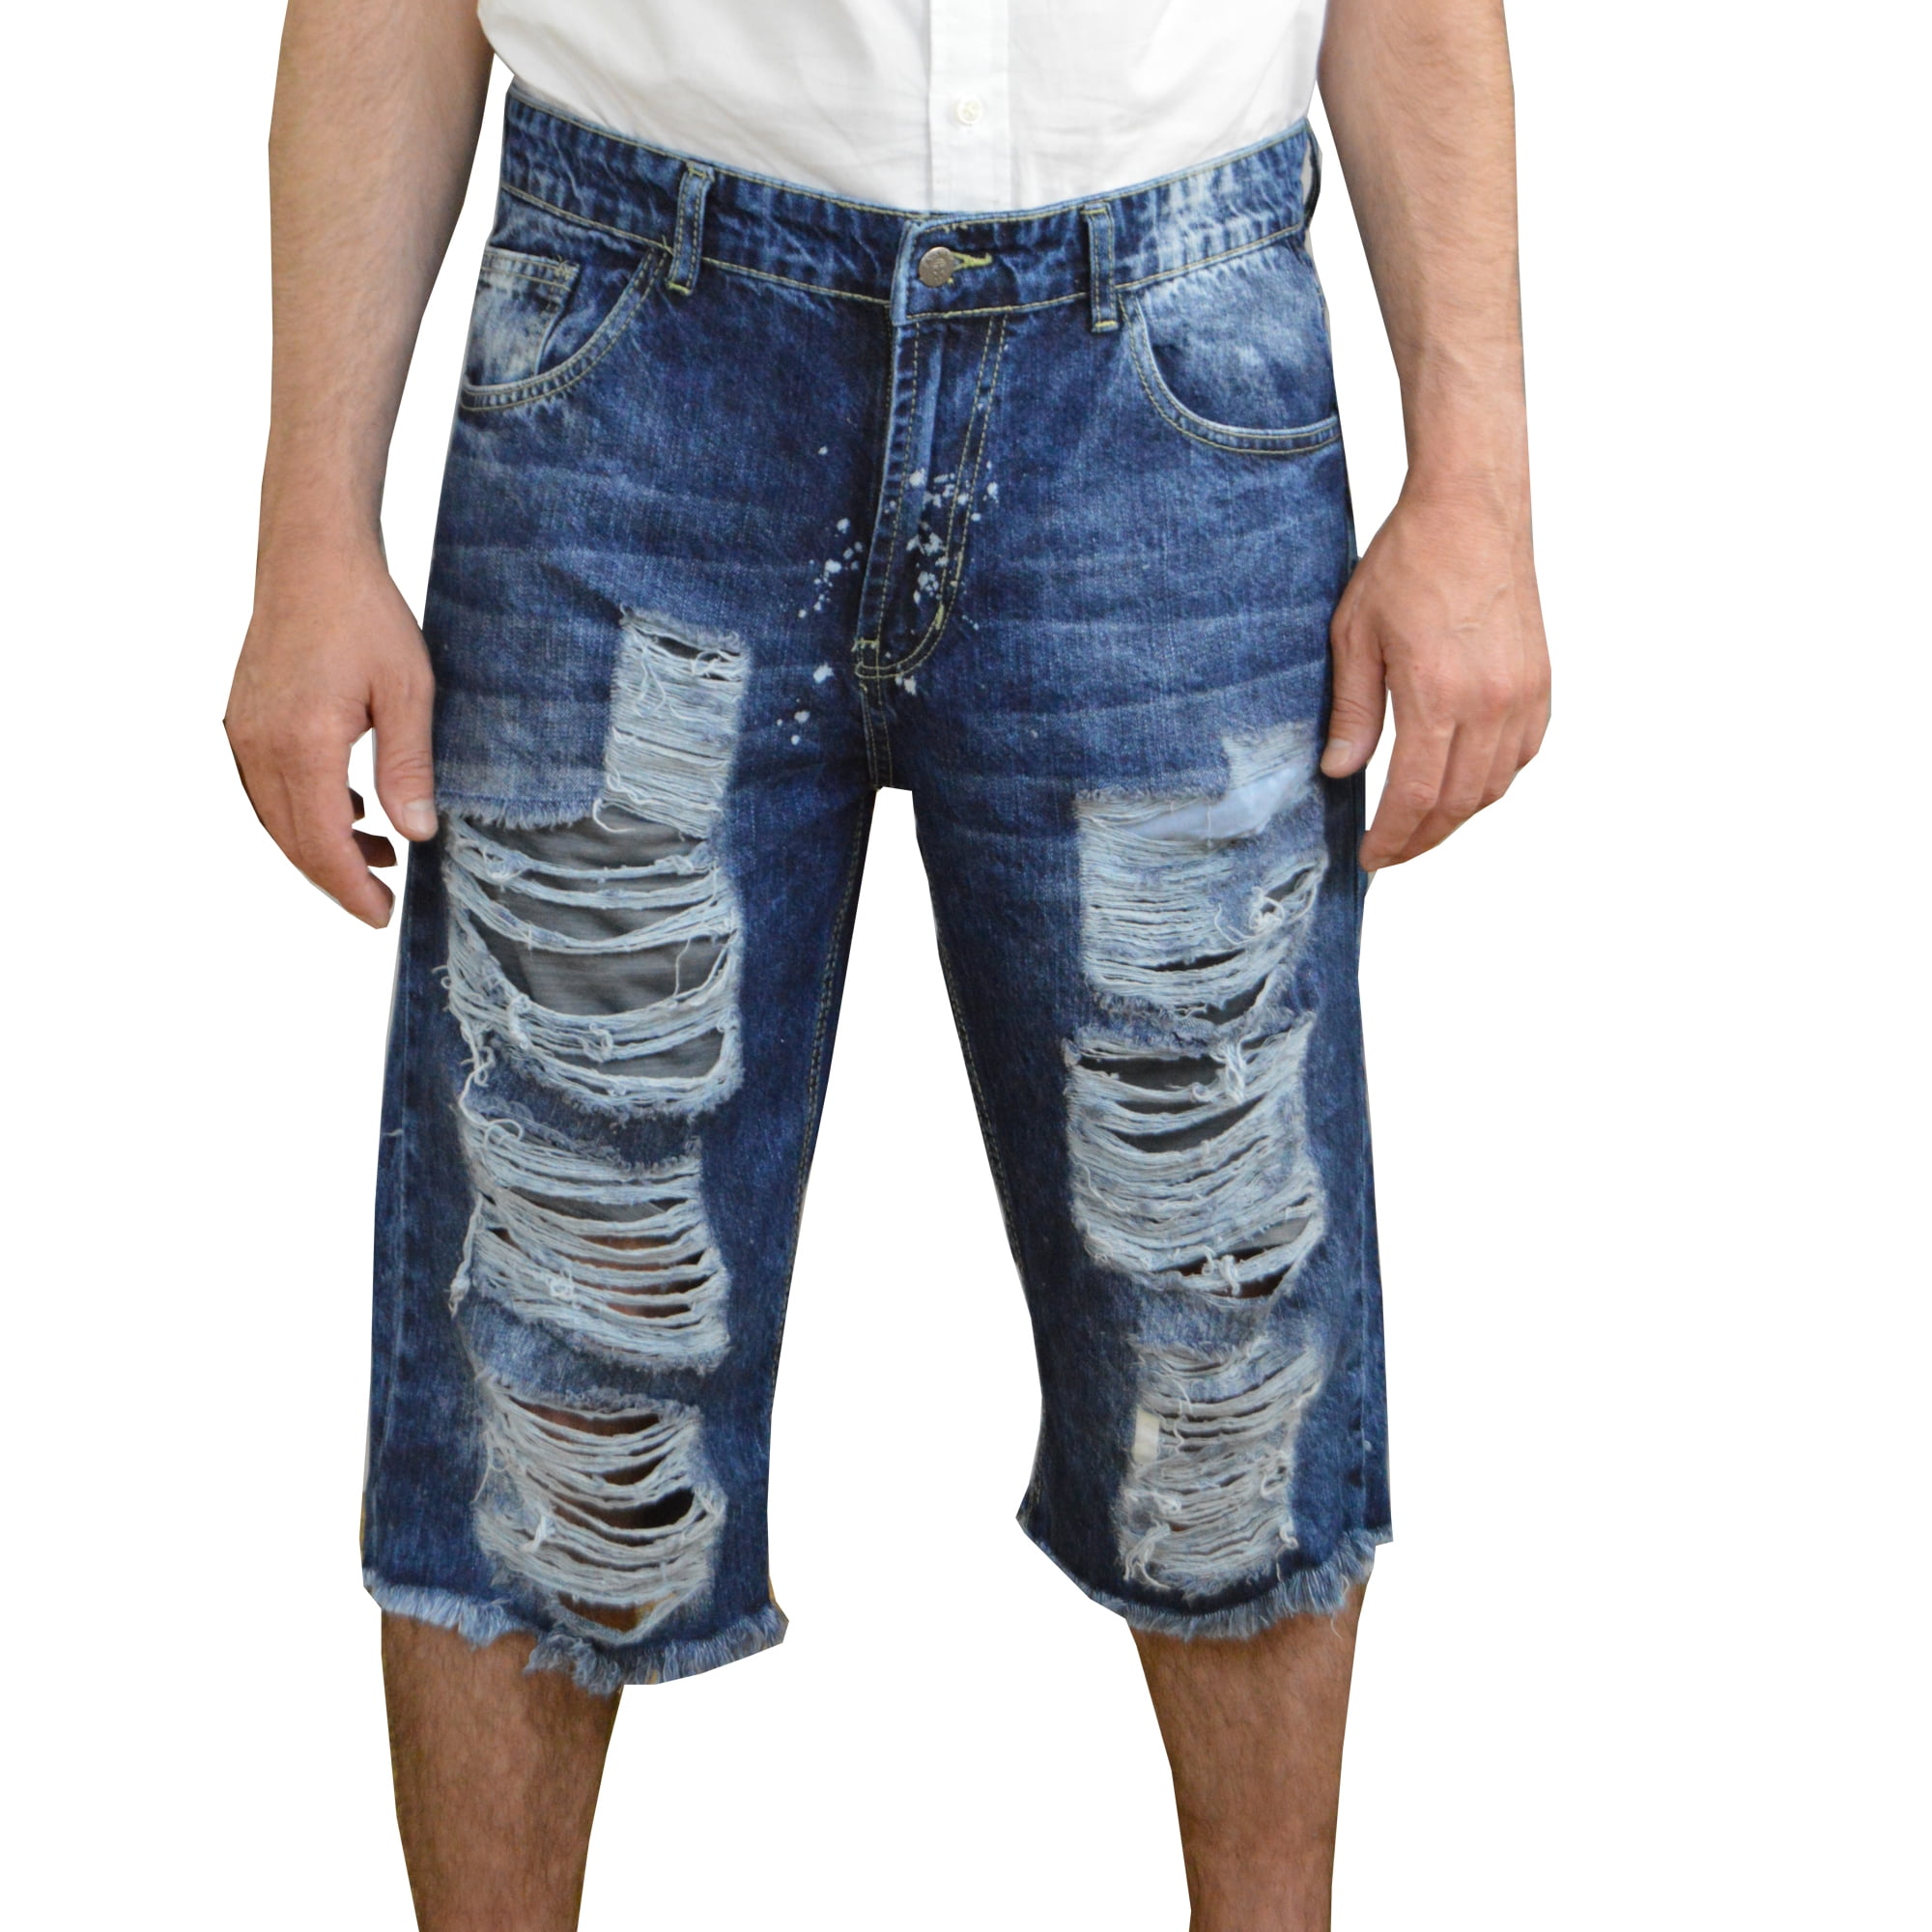 Lavnis Mens Ripped Jean Shorts Casual Distressed Denim Shorts Summer Short Pants with Pockets